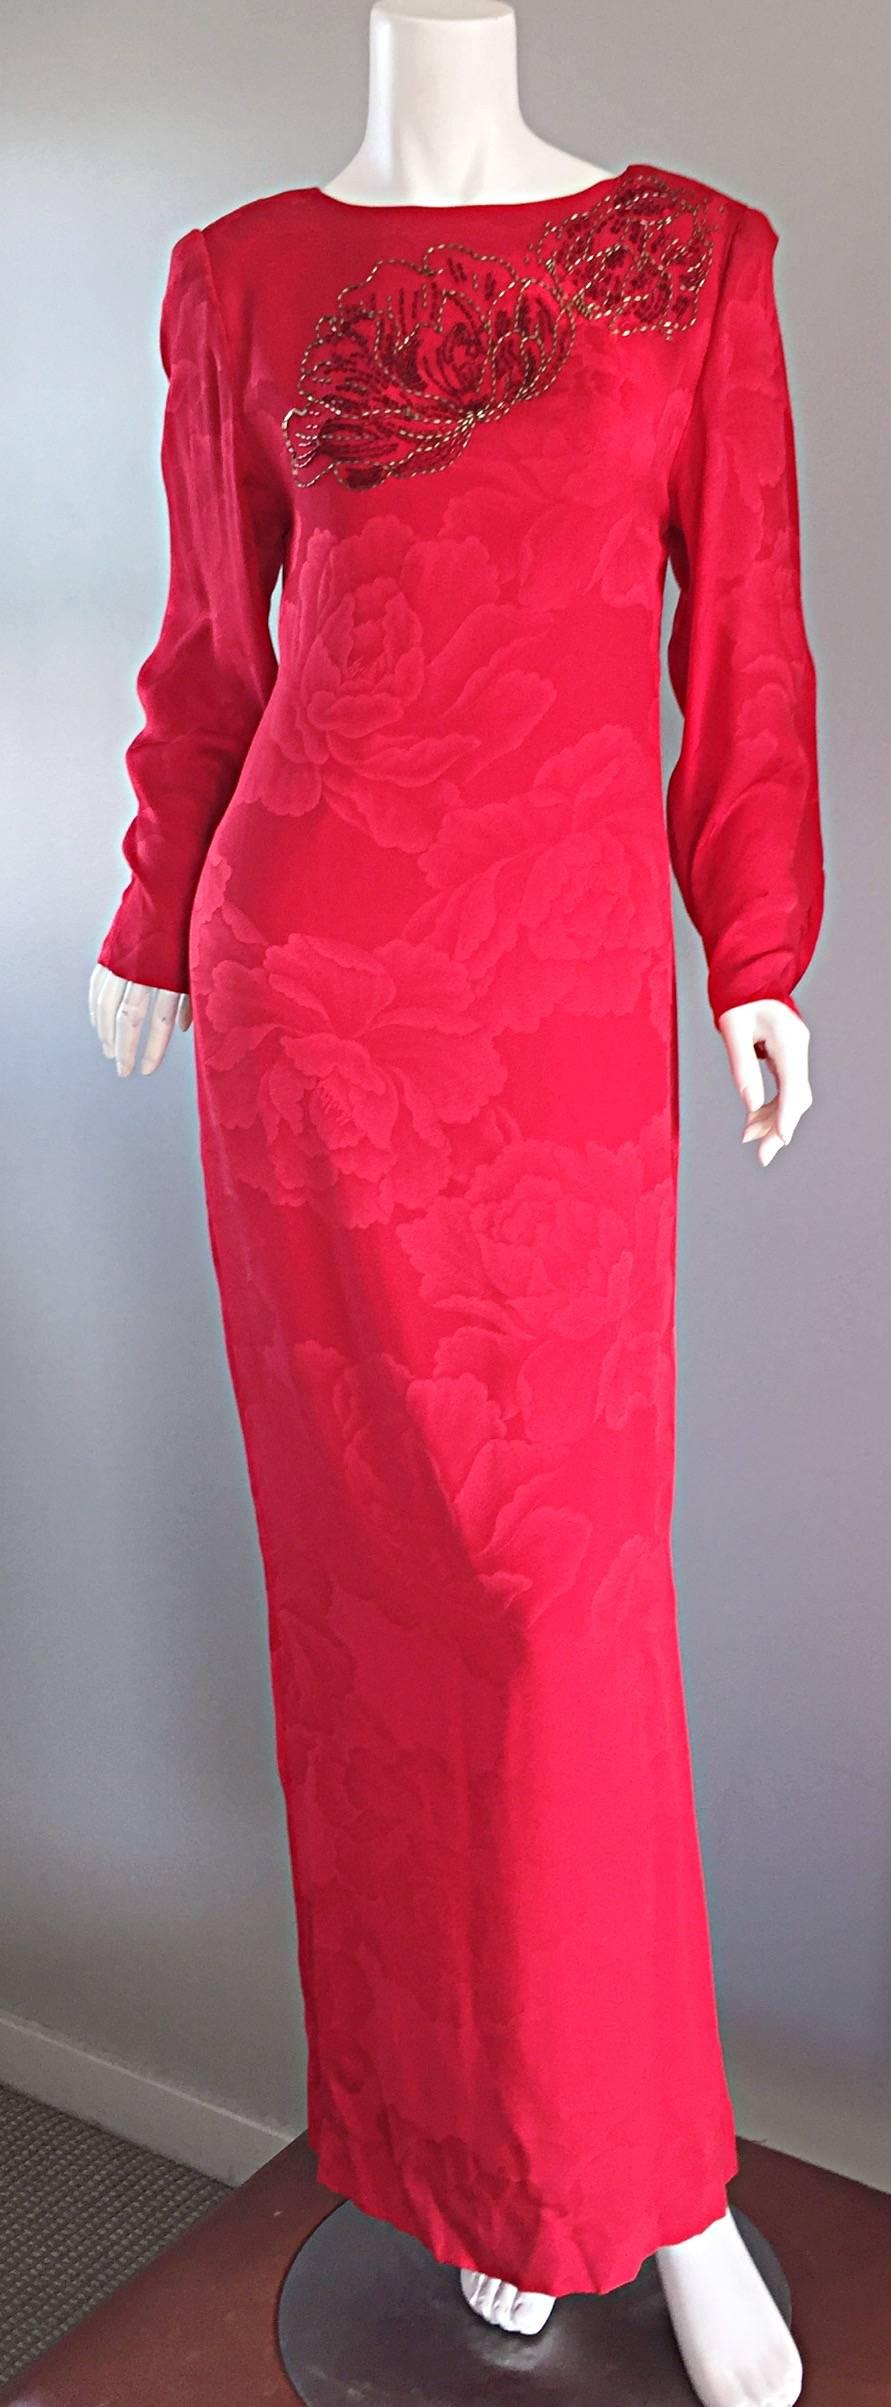 Beautiful Vintage Hanae Mori Lipstick Red Silk Beaded Floral Dress / Gown 1